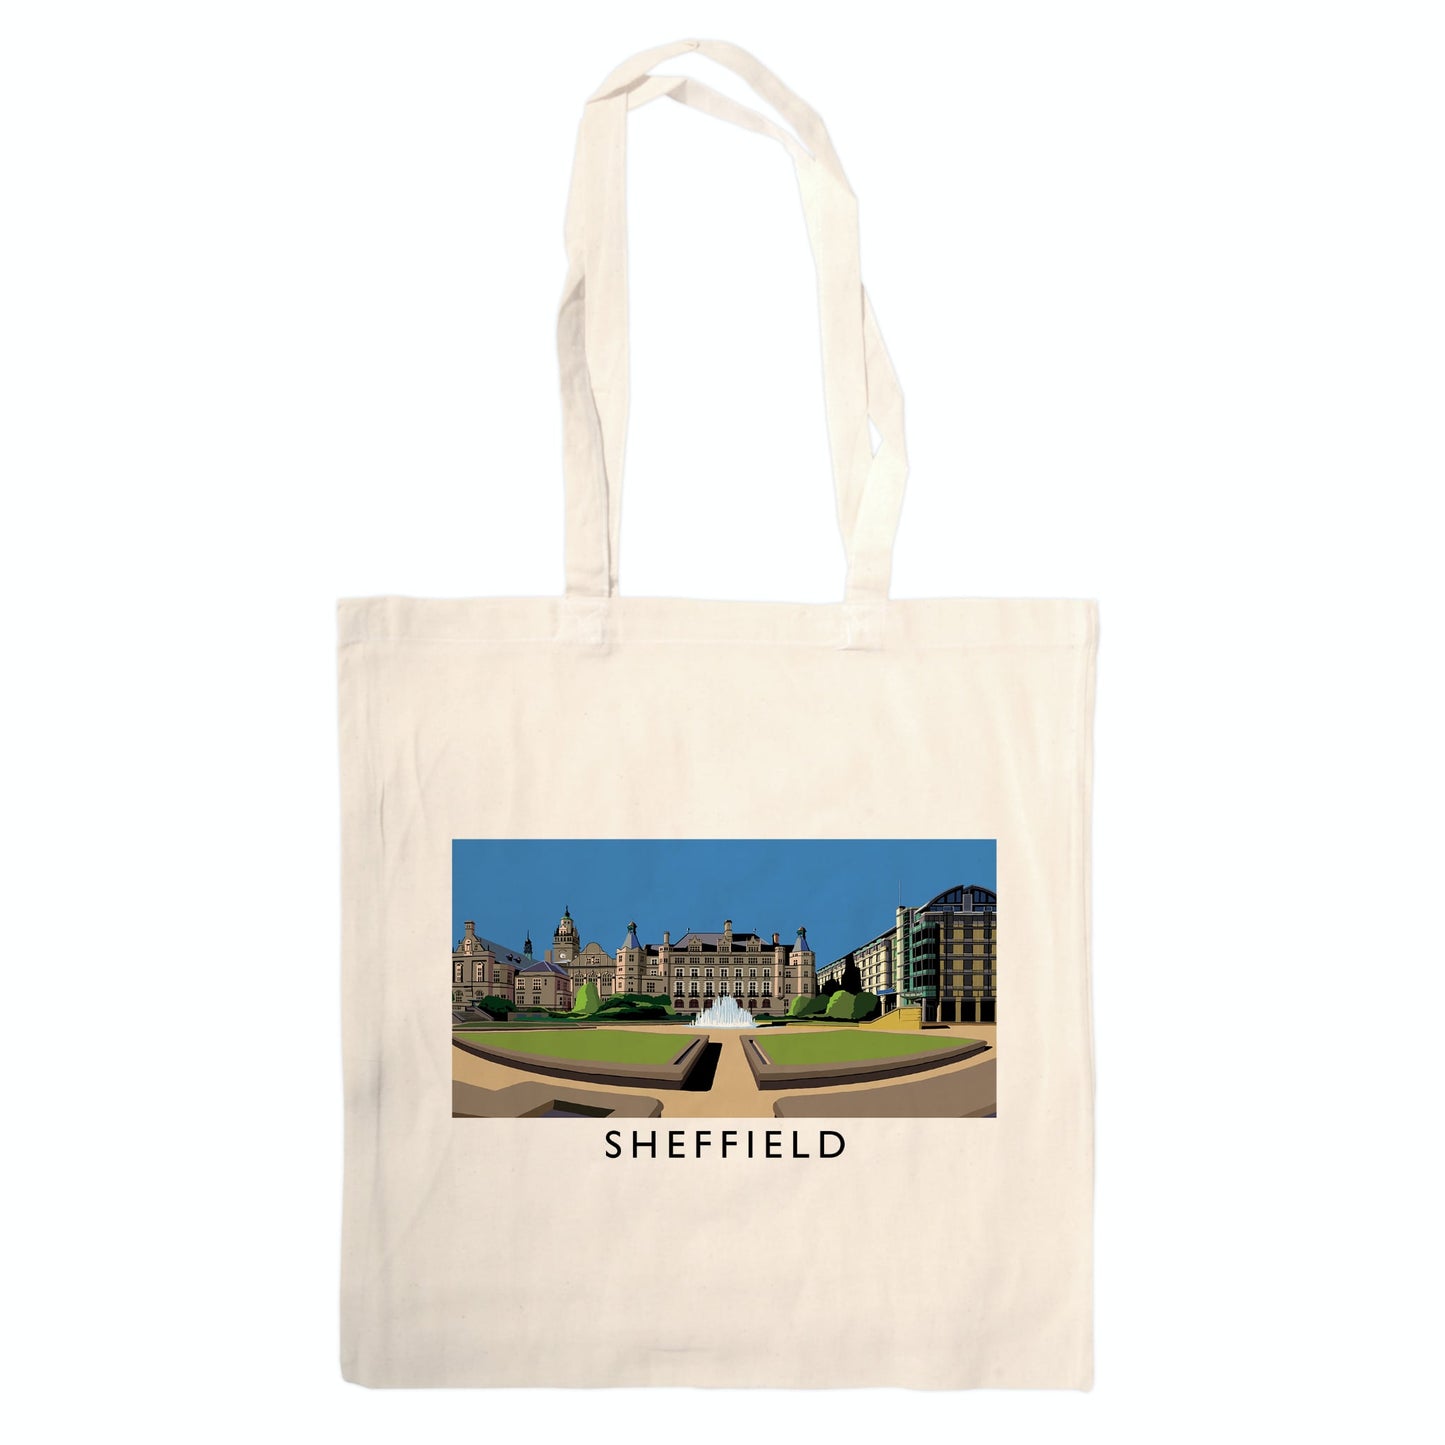 Sheffield Tote Bag - The Great Yorkshire Shop